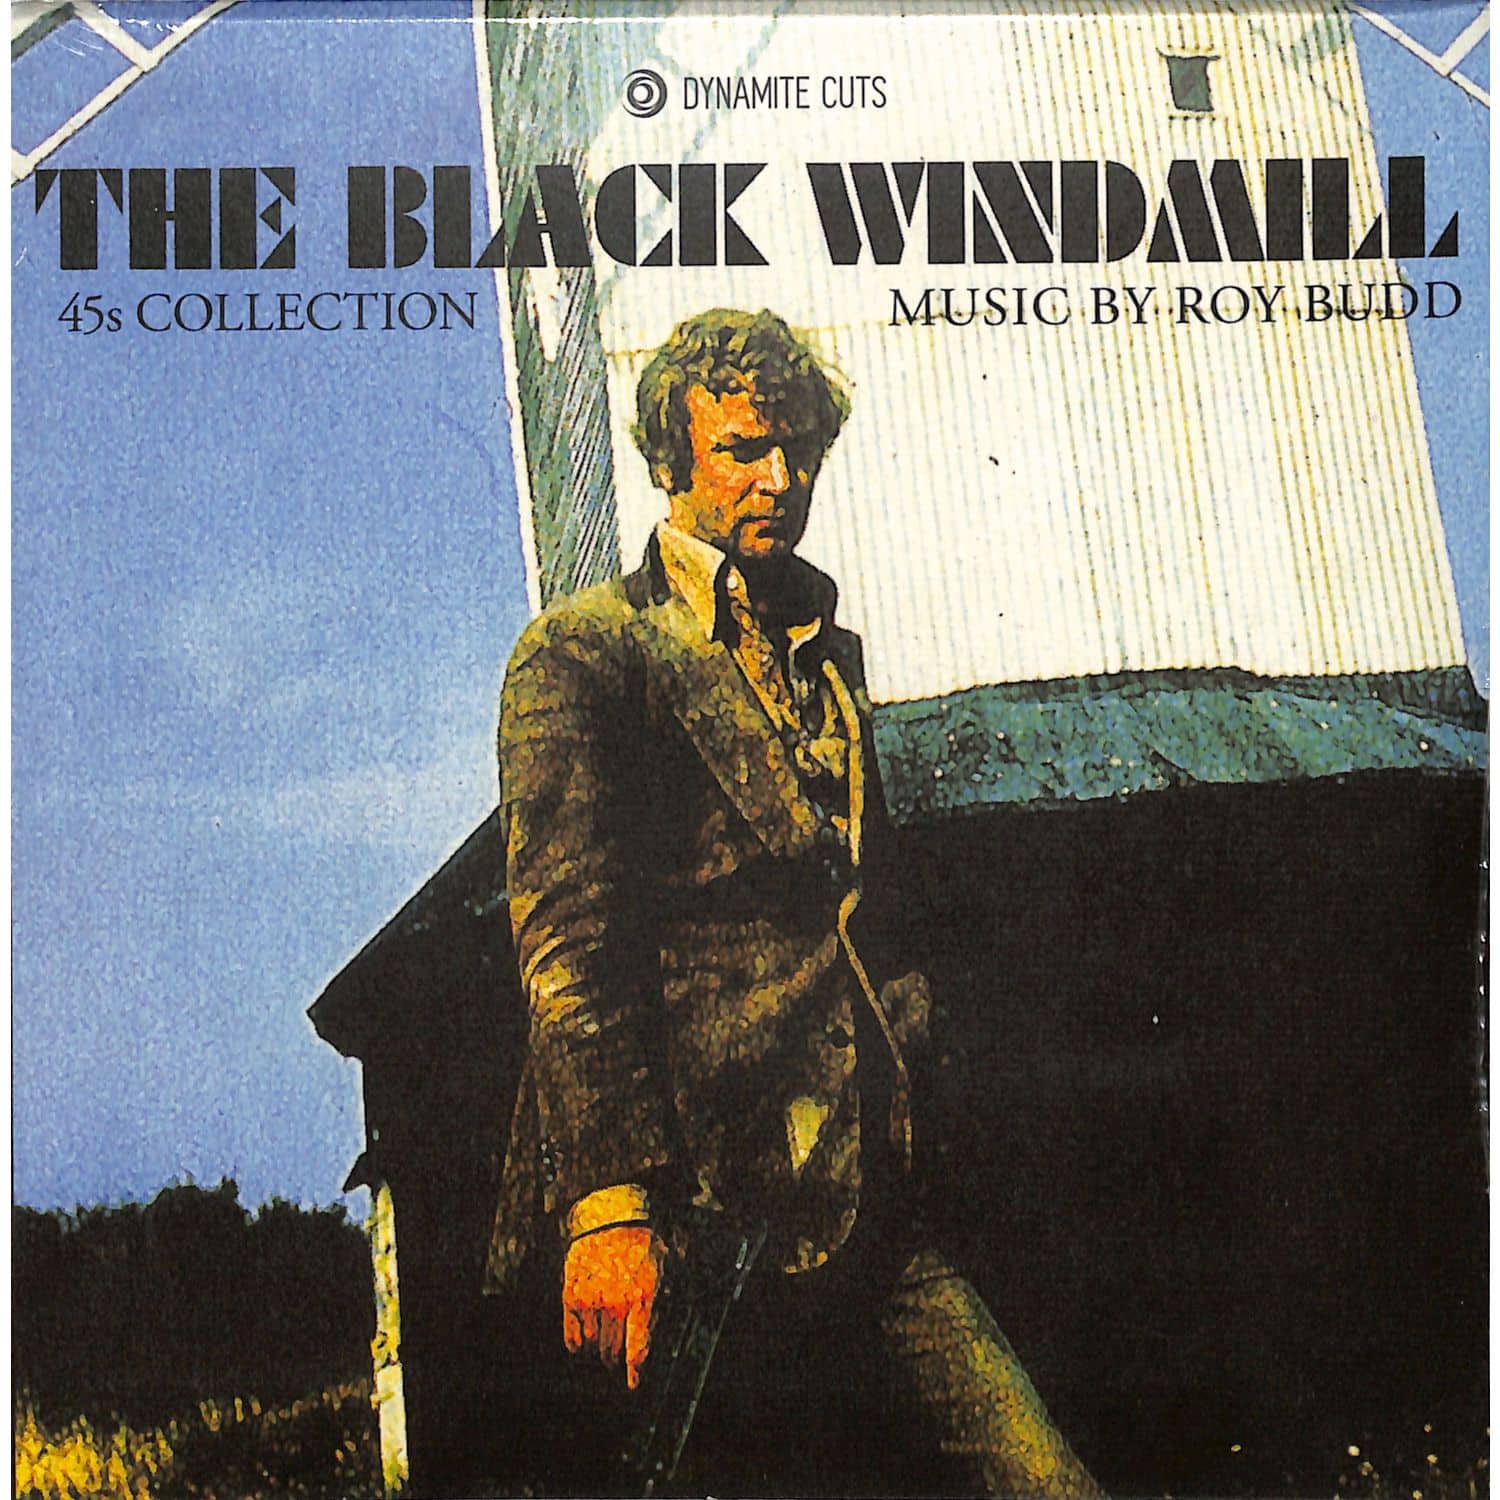 Roy Budd - BLACK WINDMILL 45s COLLECTION 